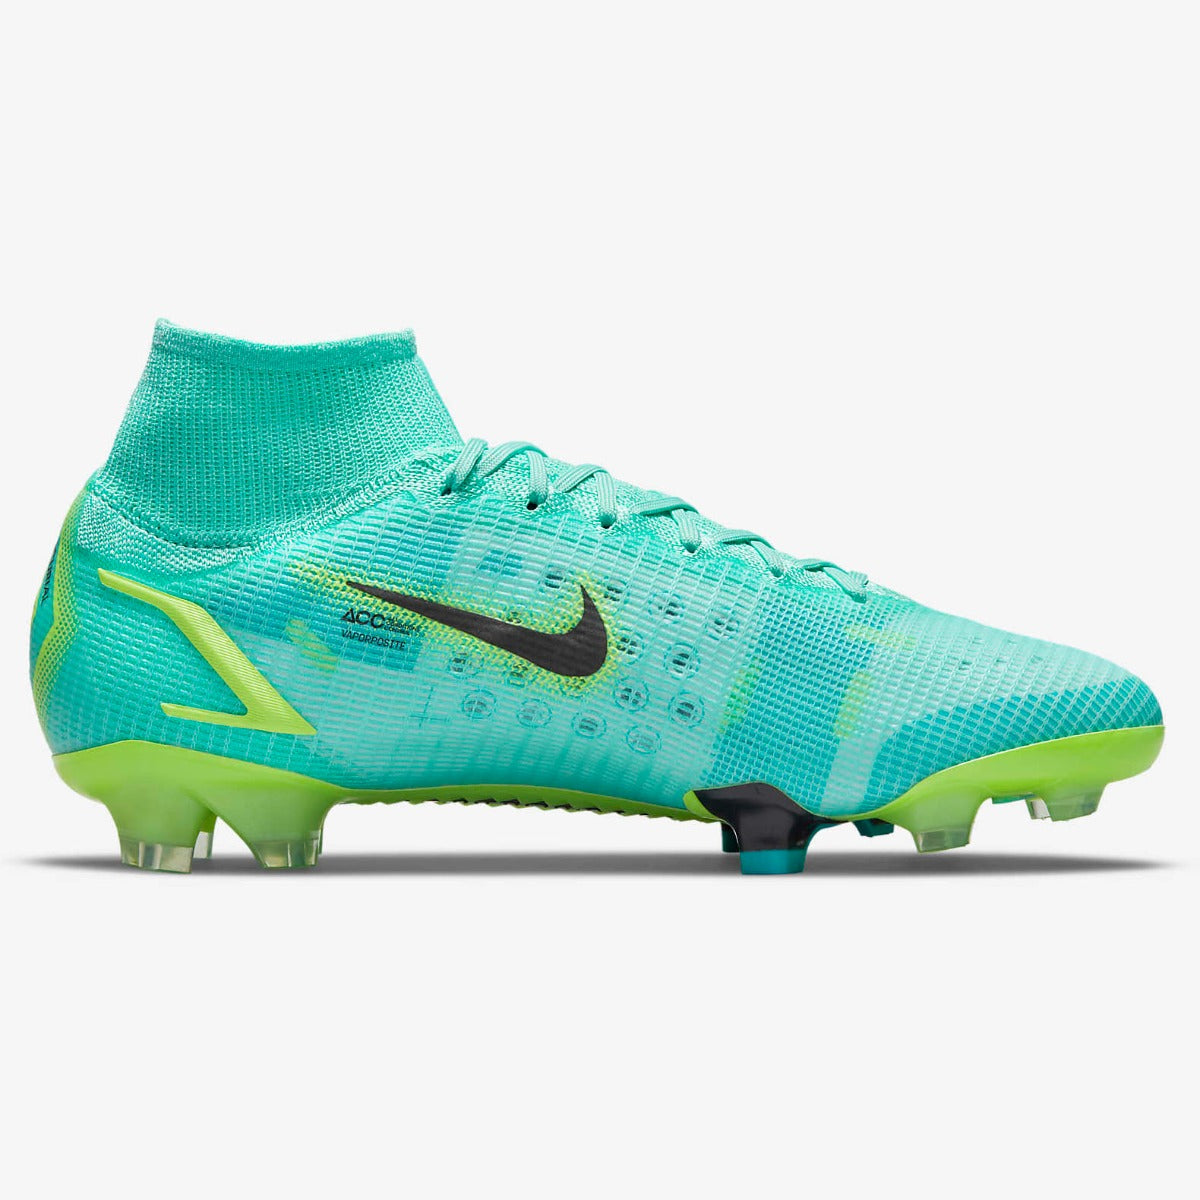 Nike Superfly 8 Elite FG - Turquoise-Lime Glow (Side 2)